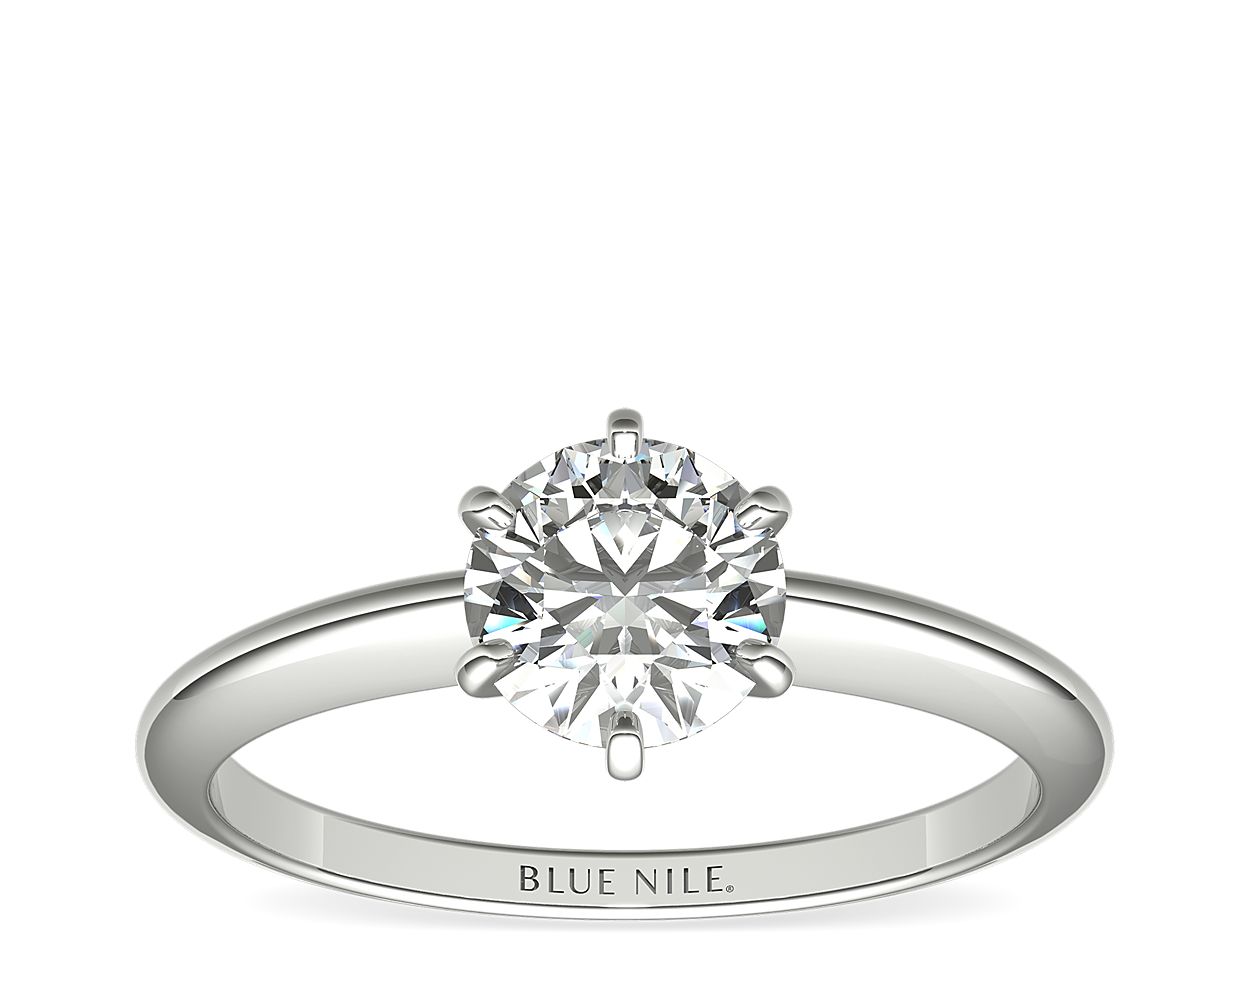 Best Engagement Rings  Top 20 Most Popular Engagement Rings